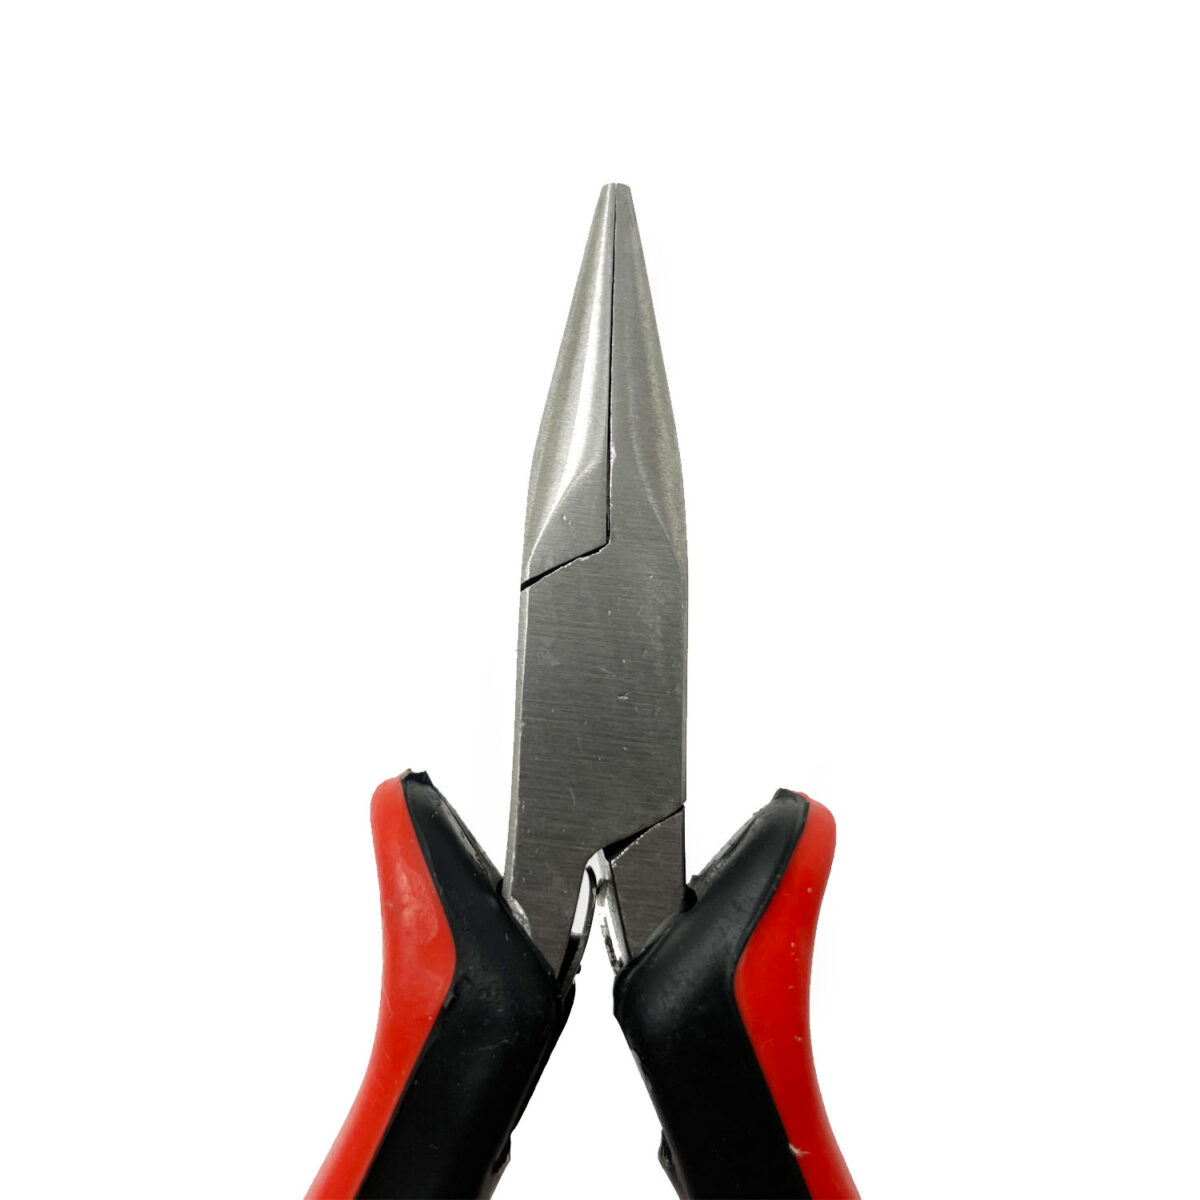 1280 2 chain nose pliers 3